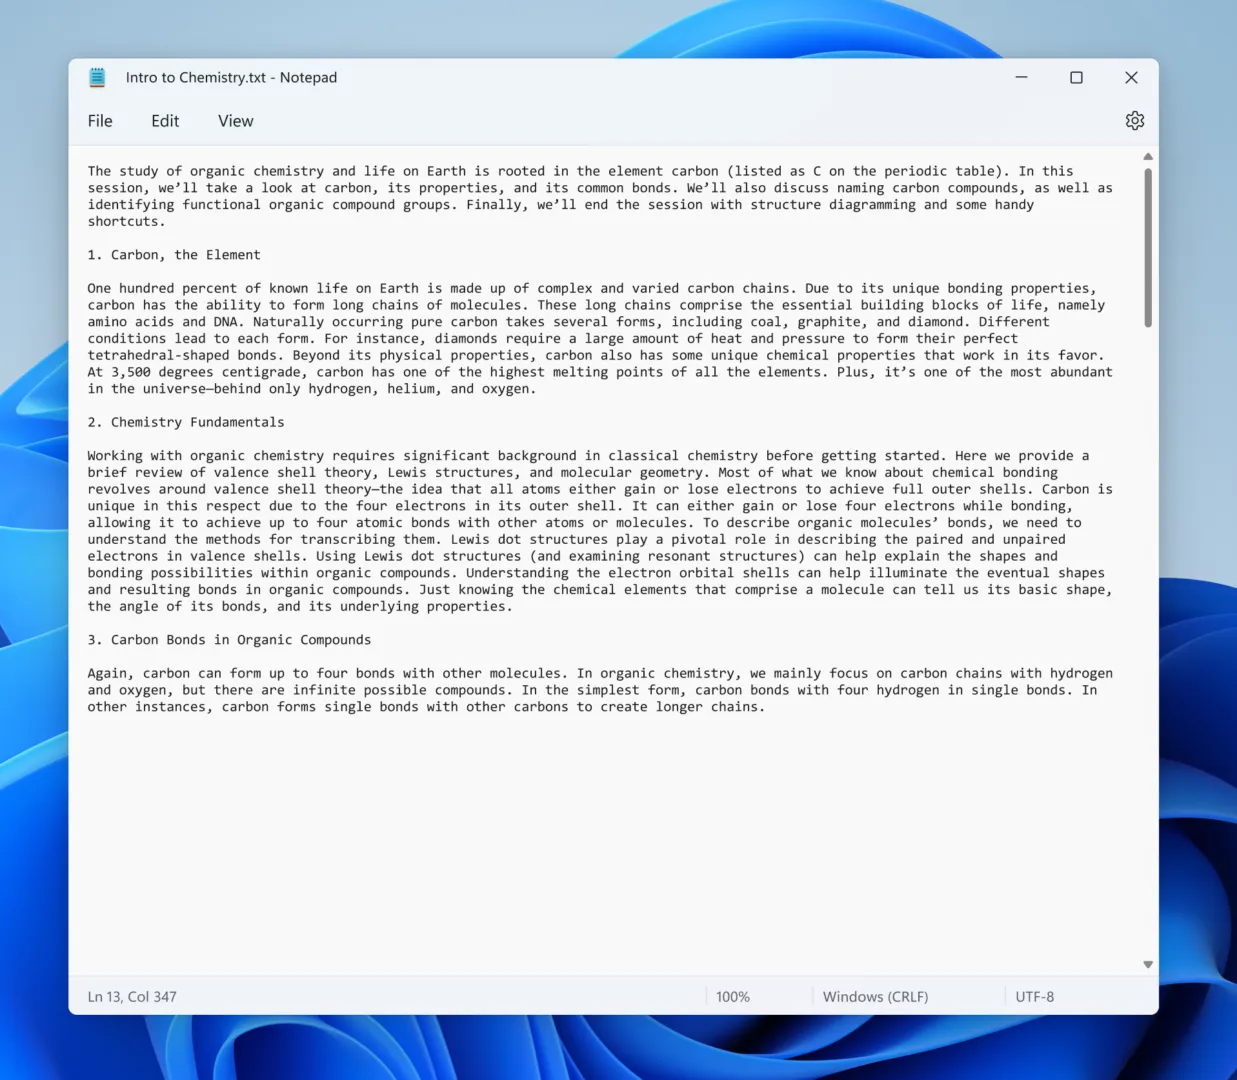 Improvements to Windows 11 Notepad include long-awaited enhancements by Microsoft.